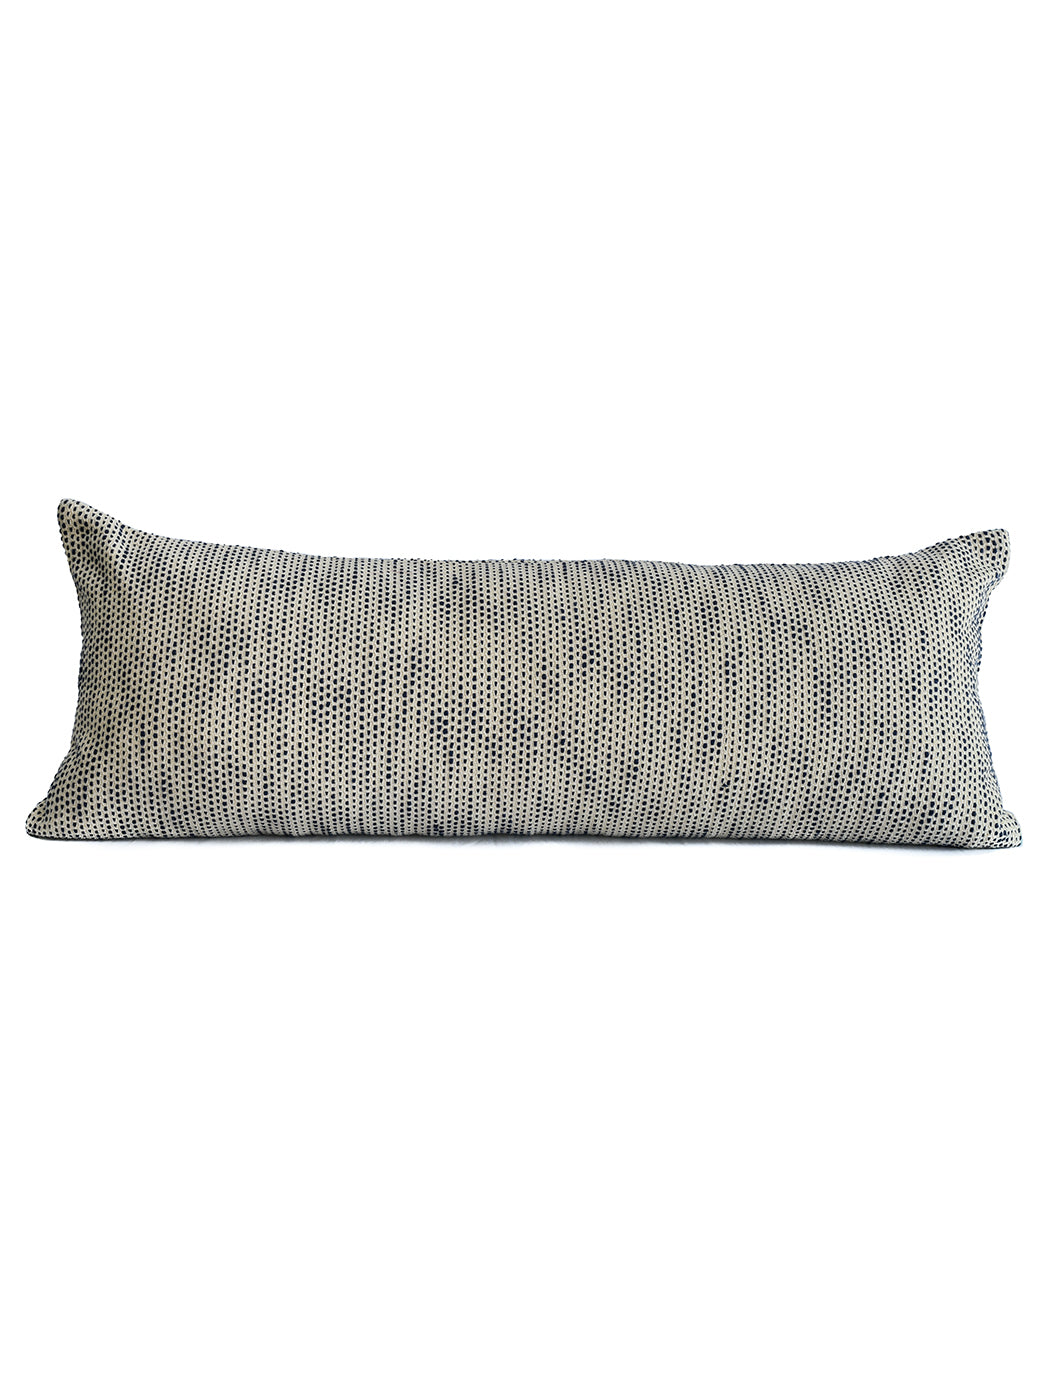 Speckled Weave - Extra Long Lumbar